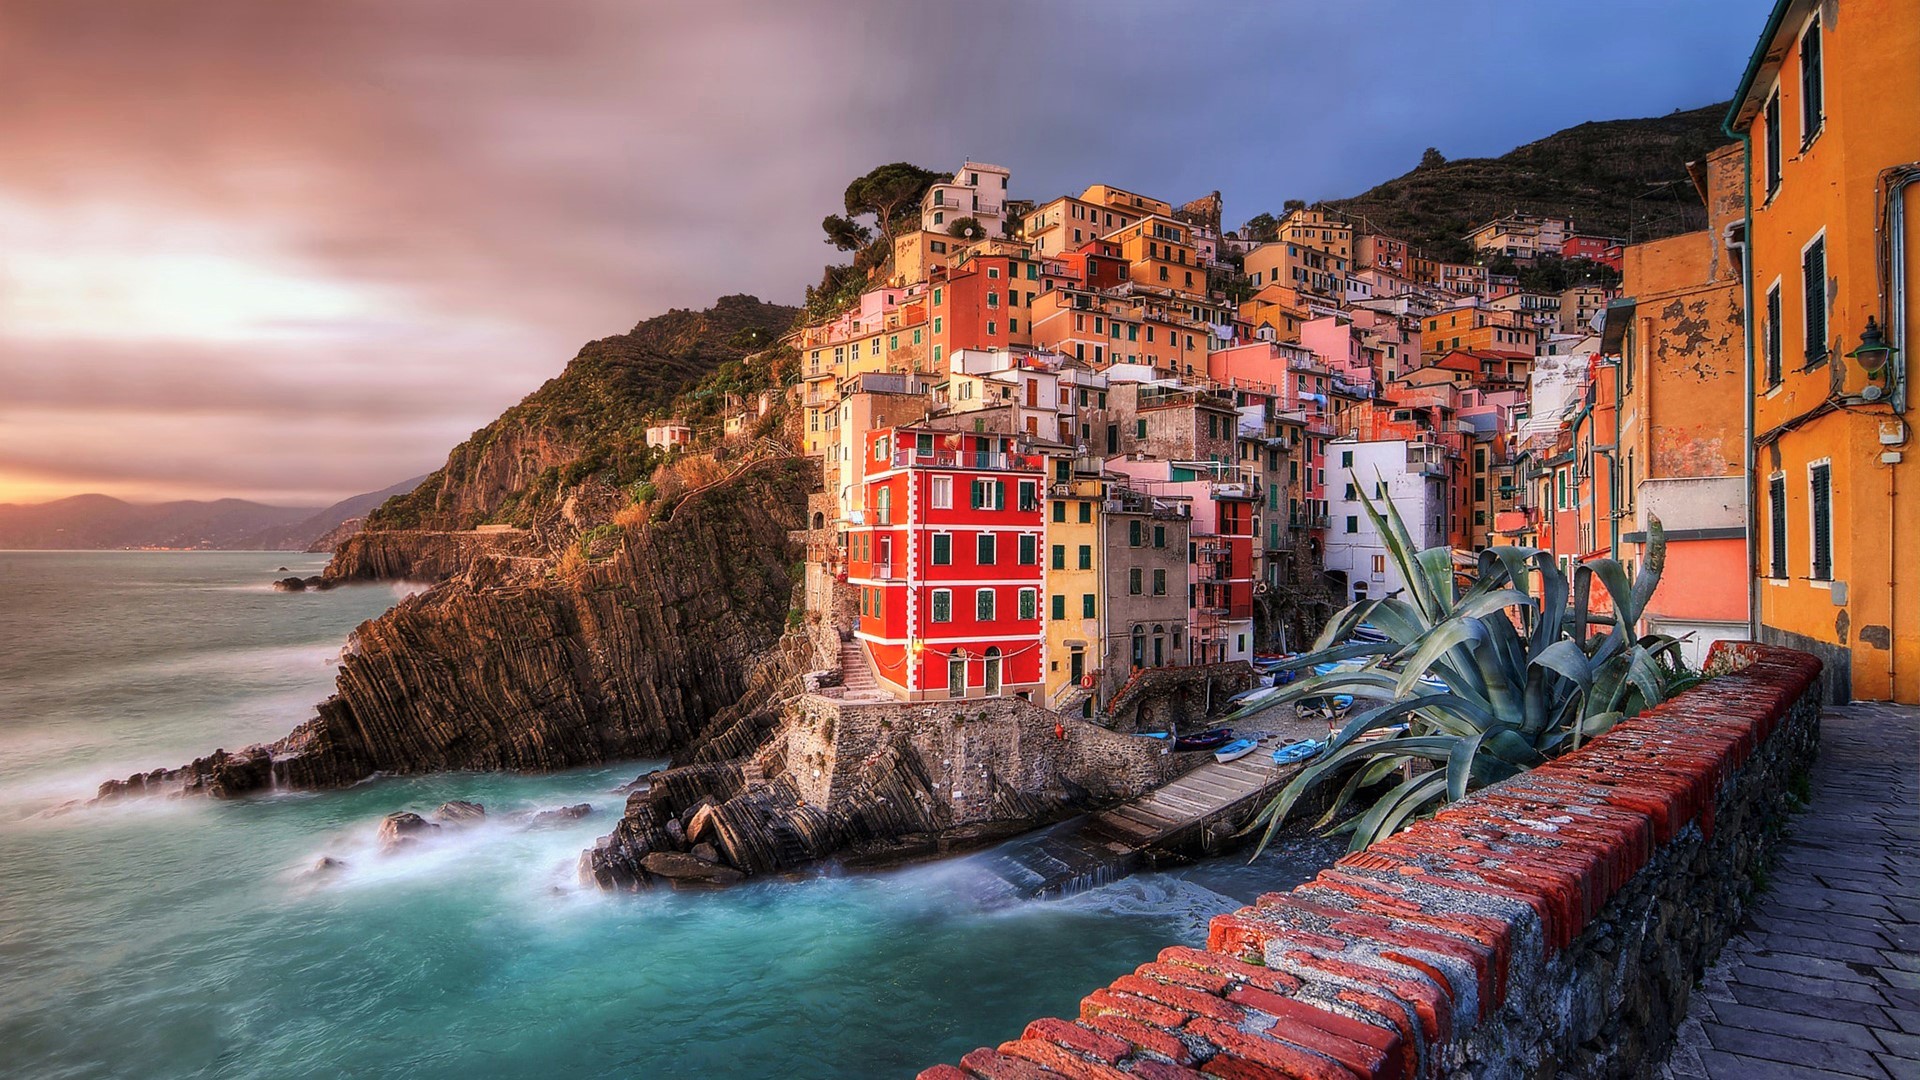 italy, man made, riomaggiore, city, coast, colorful, house, towns